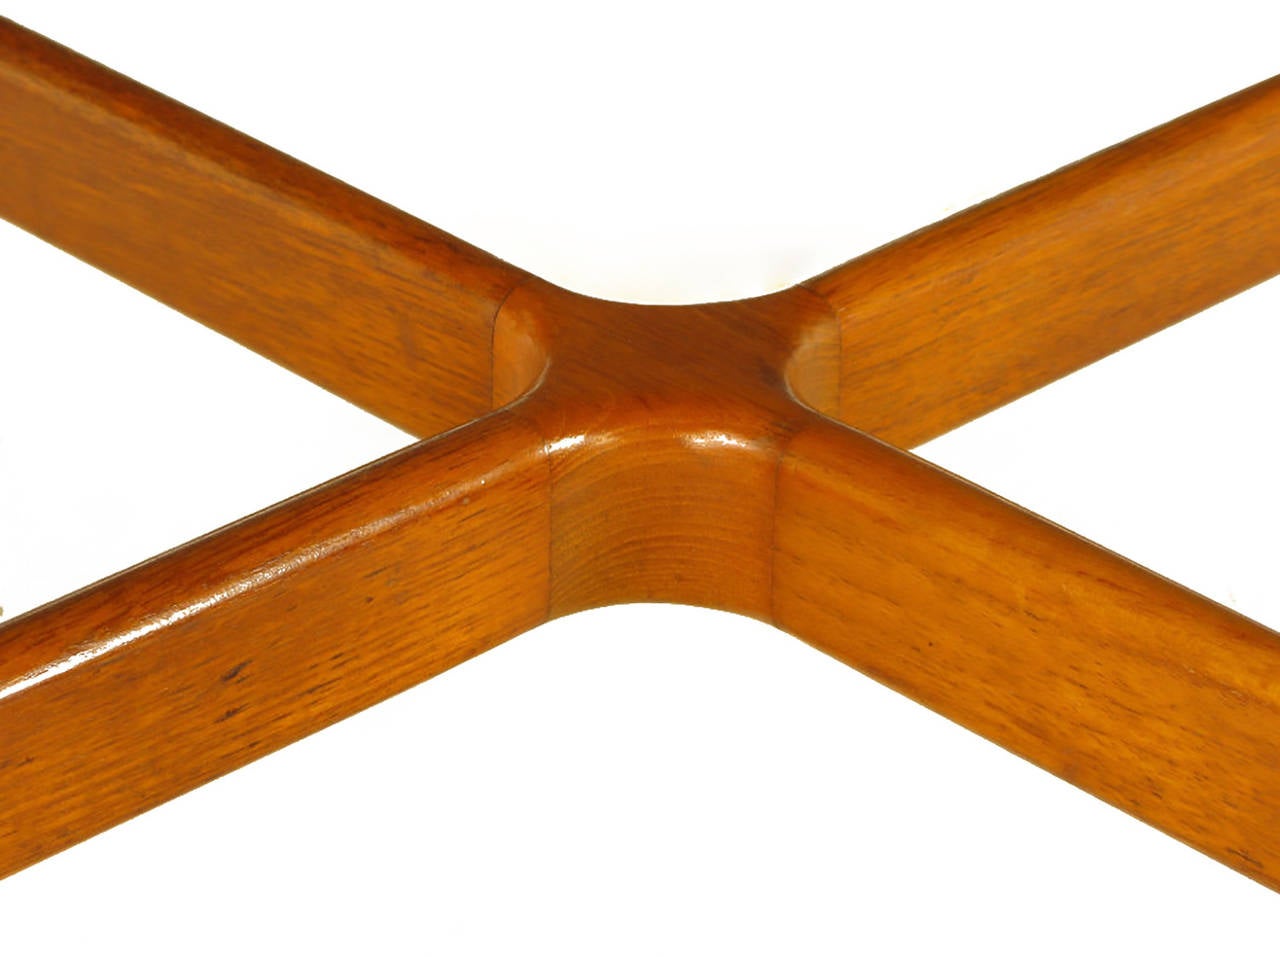 Arne Halvorsen Teak Coffee Table for Rasmus Solberg In Excellent Condition For Sale In Chicago, IL